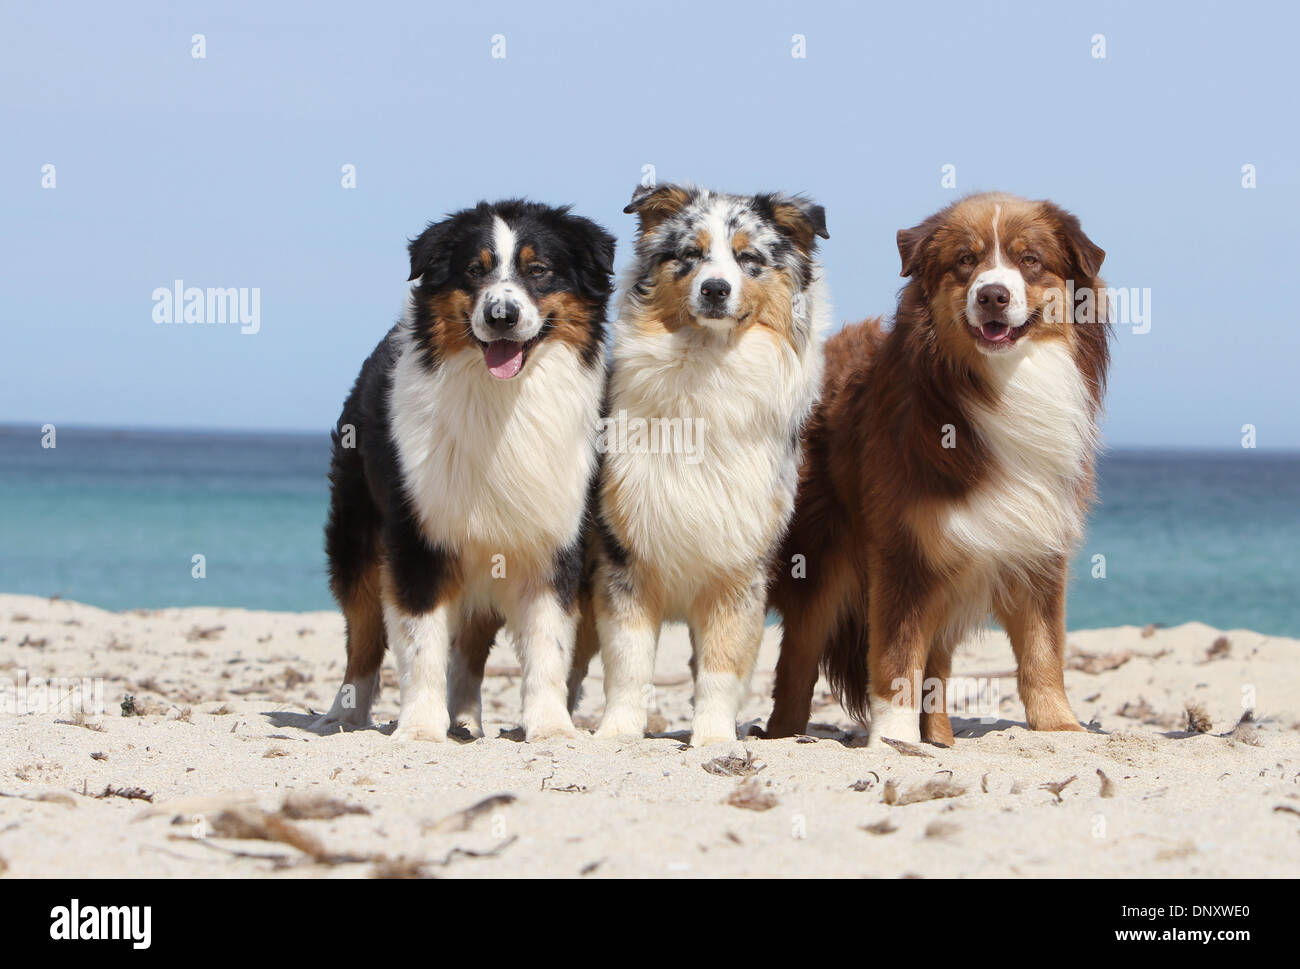 Dog Australian shepherd / Aussie  Three adults (different colors) standing on the beach Stock Photo